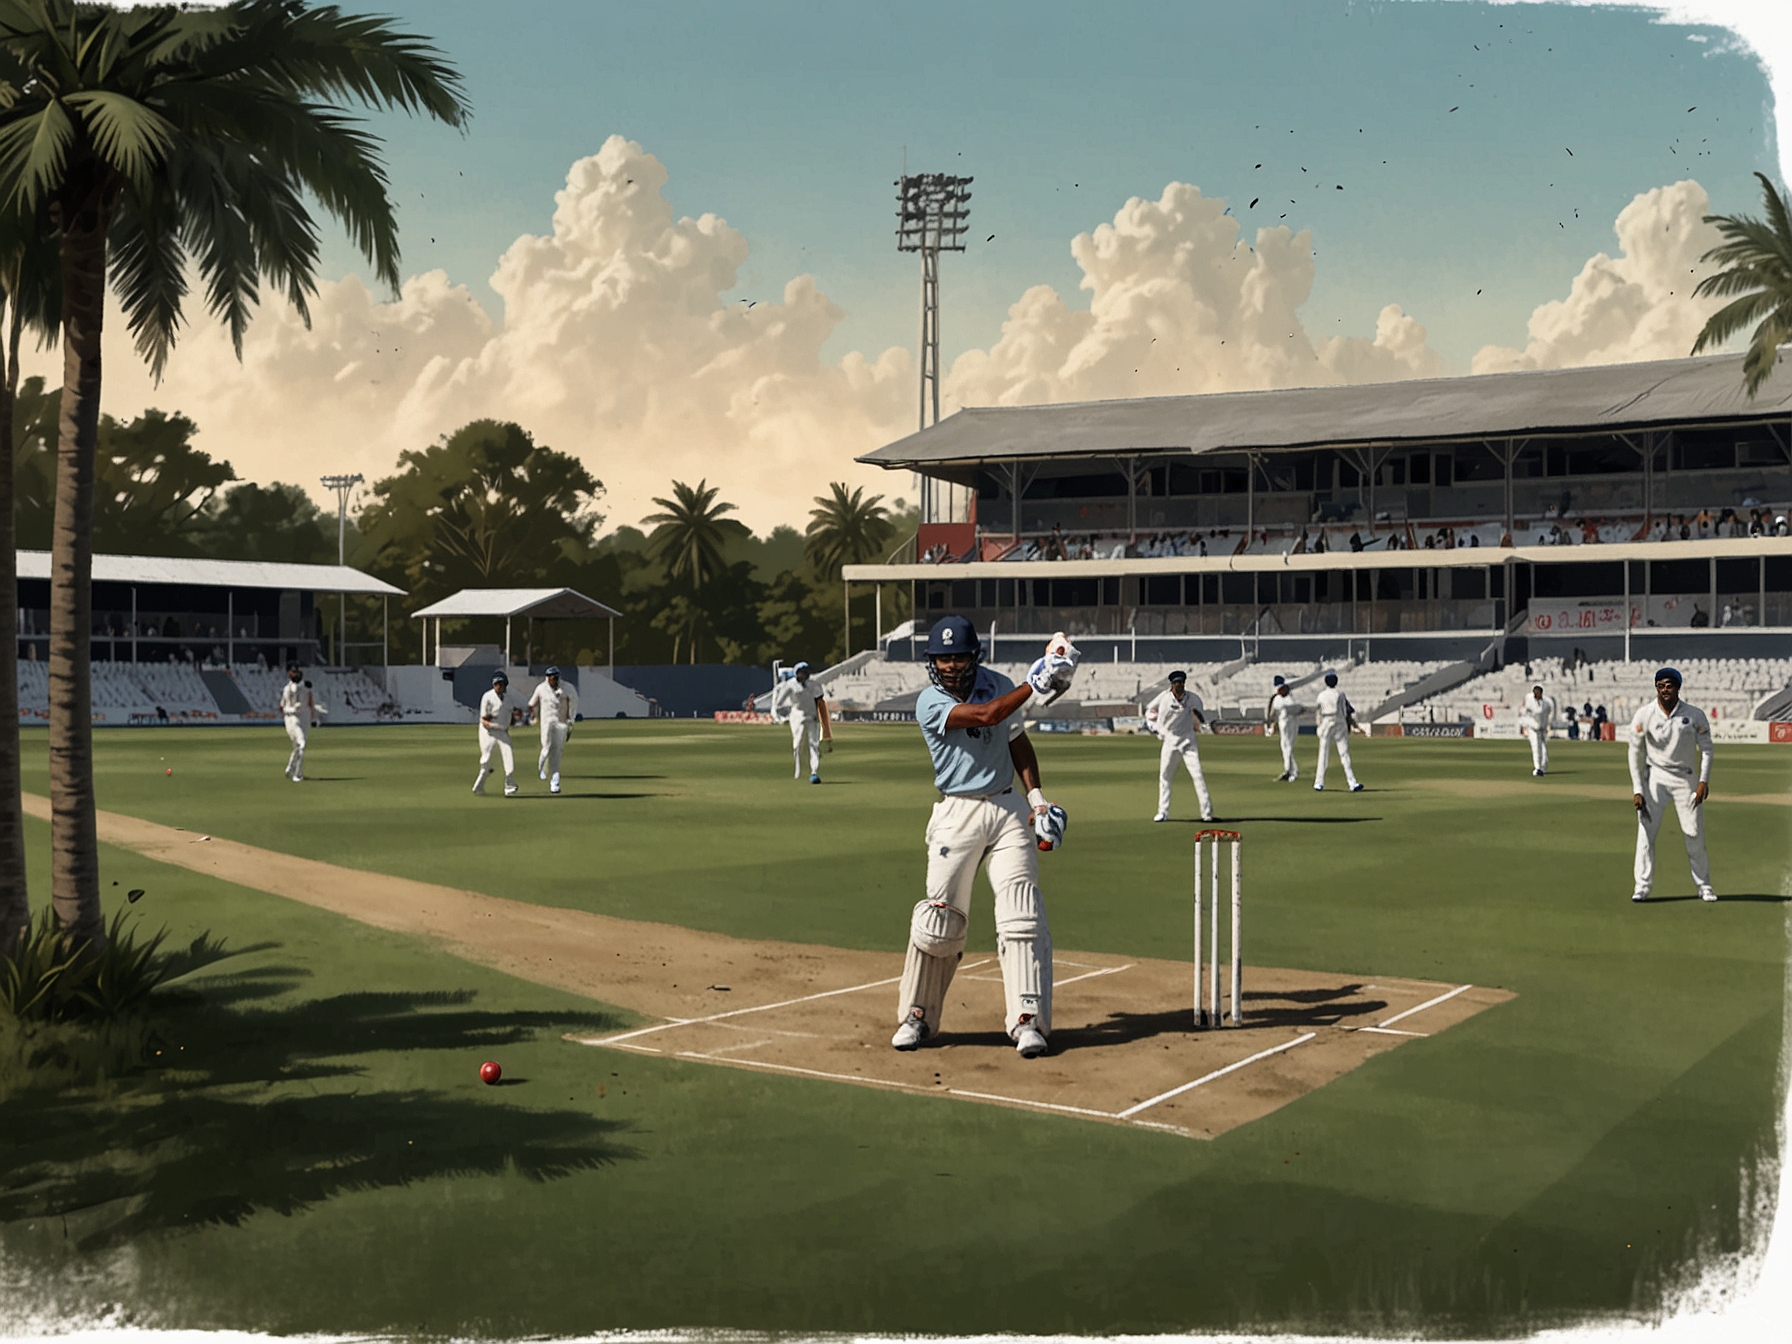 The Indian cricket team practices in West Indies, showcasing experienced players like Virat Kohli and young talents such as Shubman Gill, in preparation for ICC events.